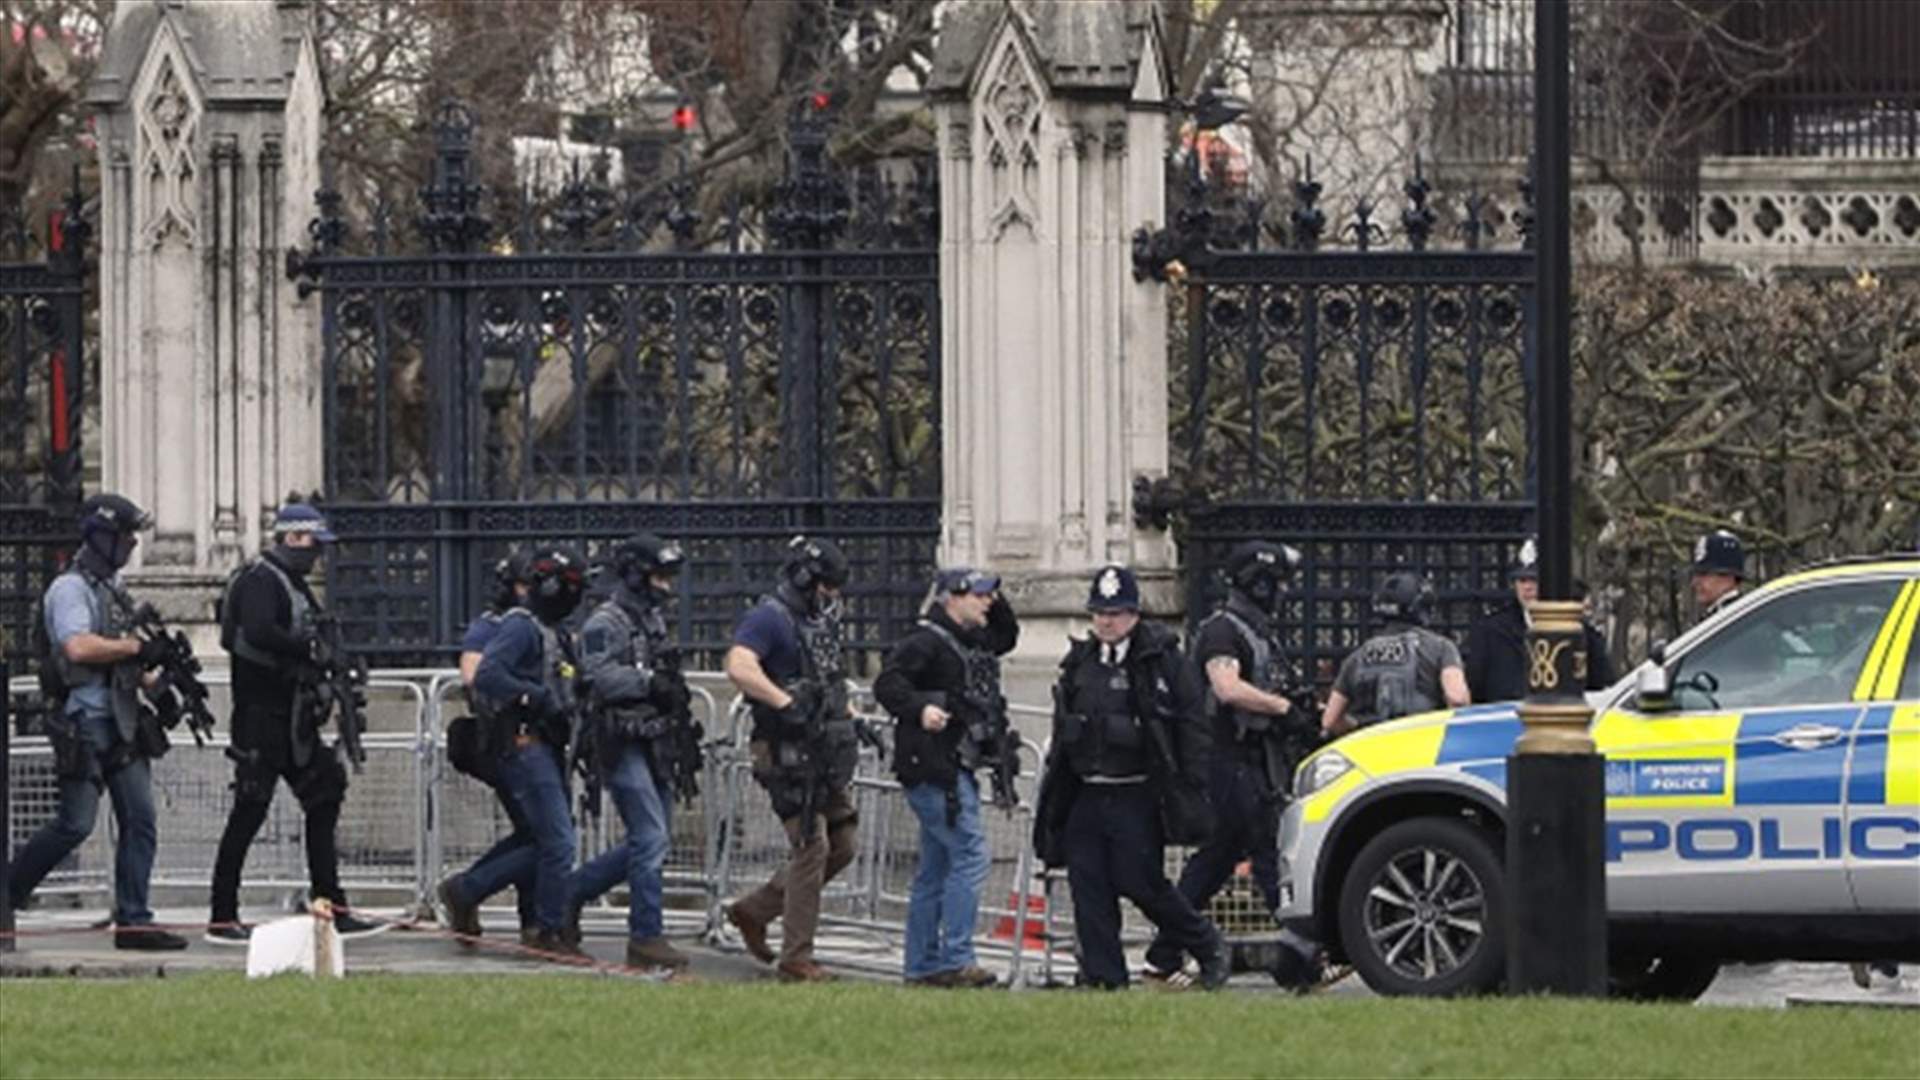 British police arrest man reportedly with knife near UK ministries